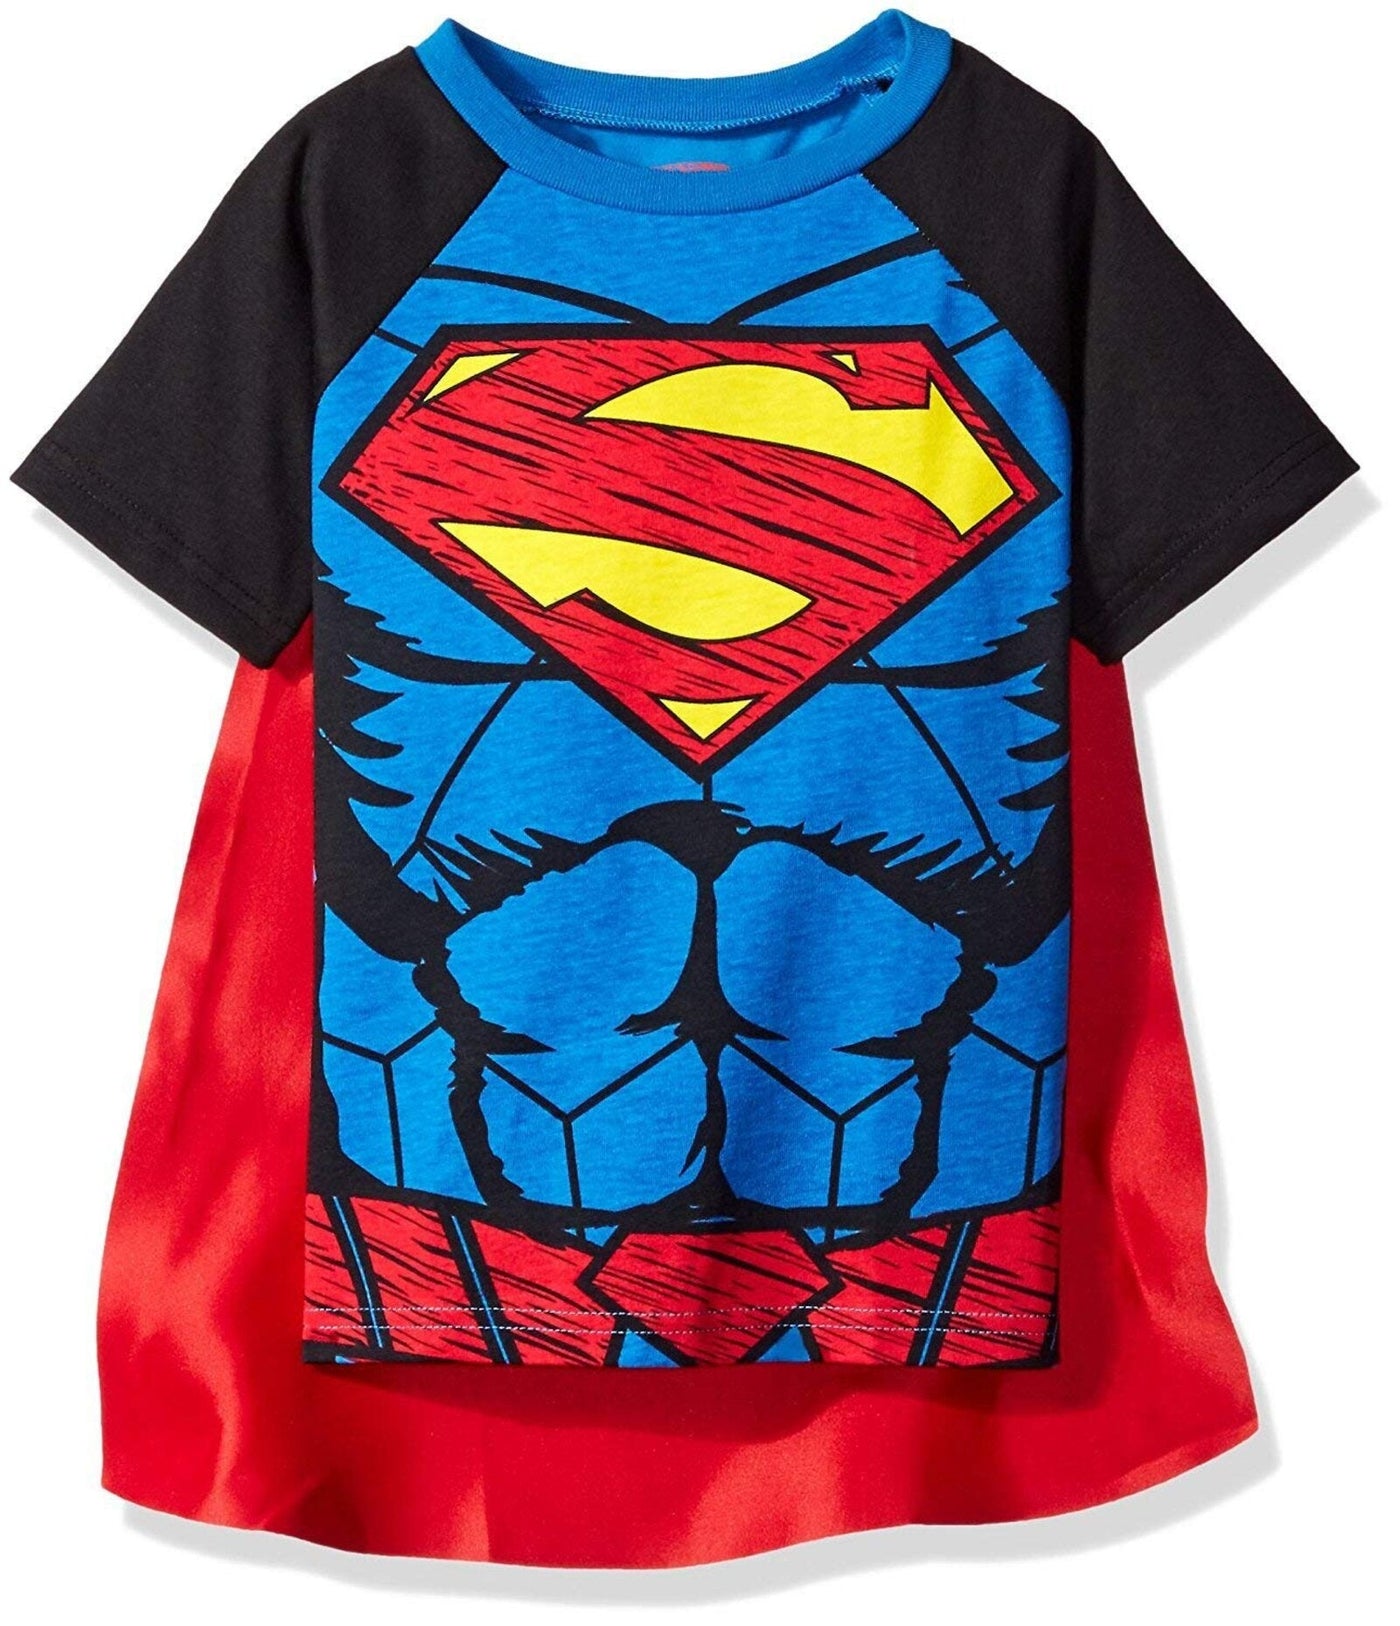 Warner Bros. Justice League Superman Cosplay T-Shirt and Cape - imagikids